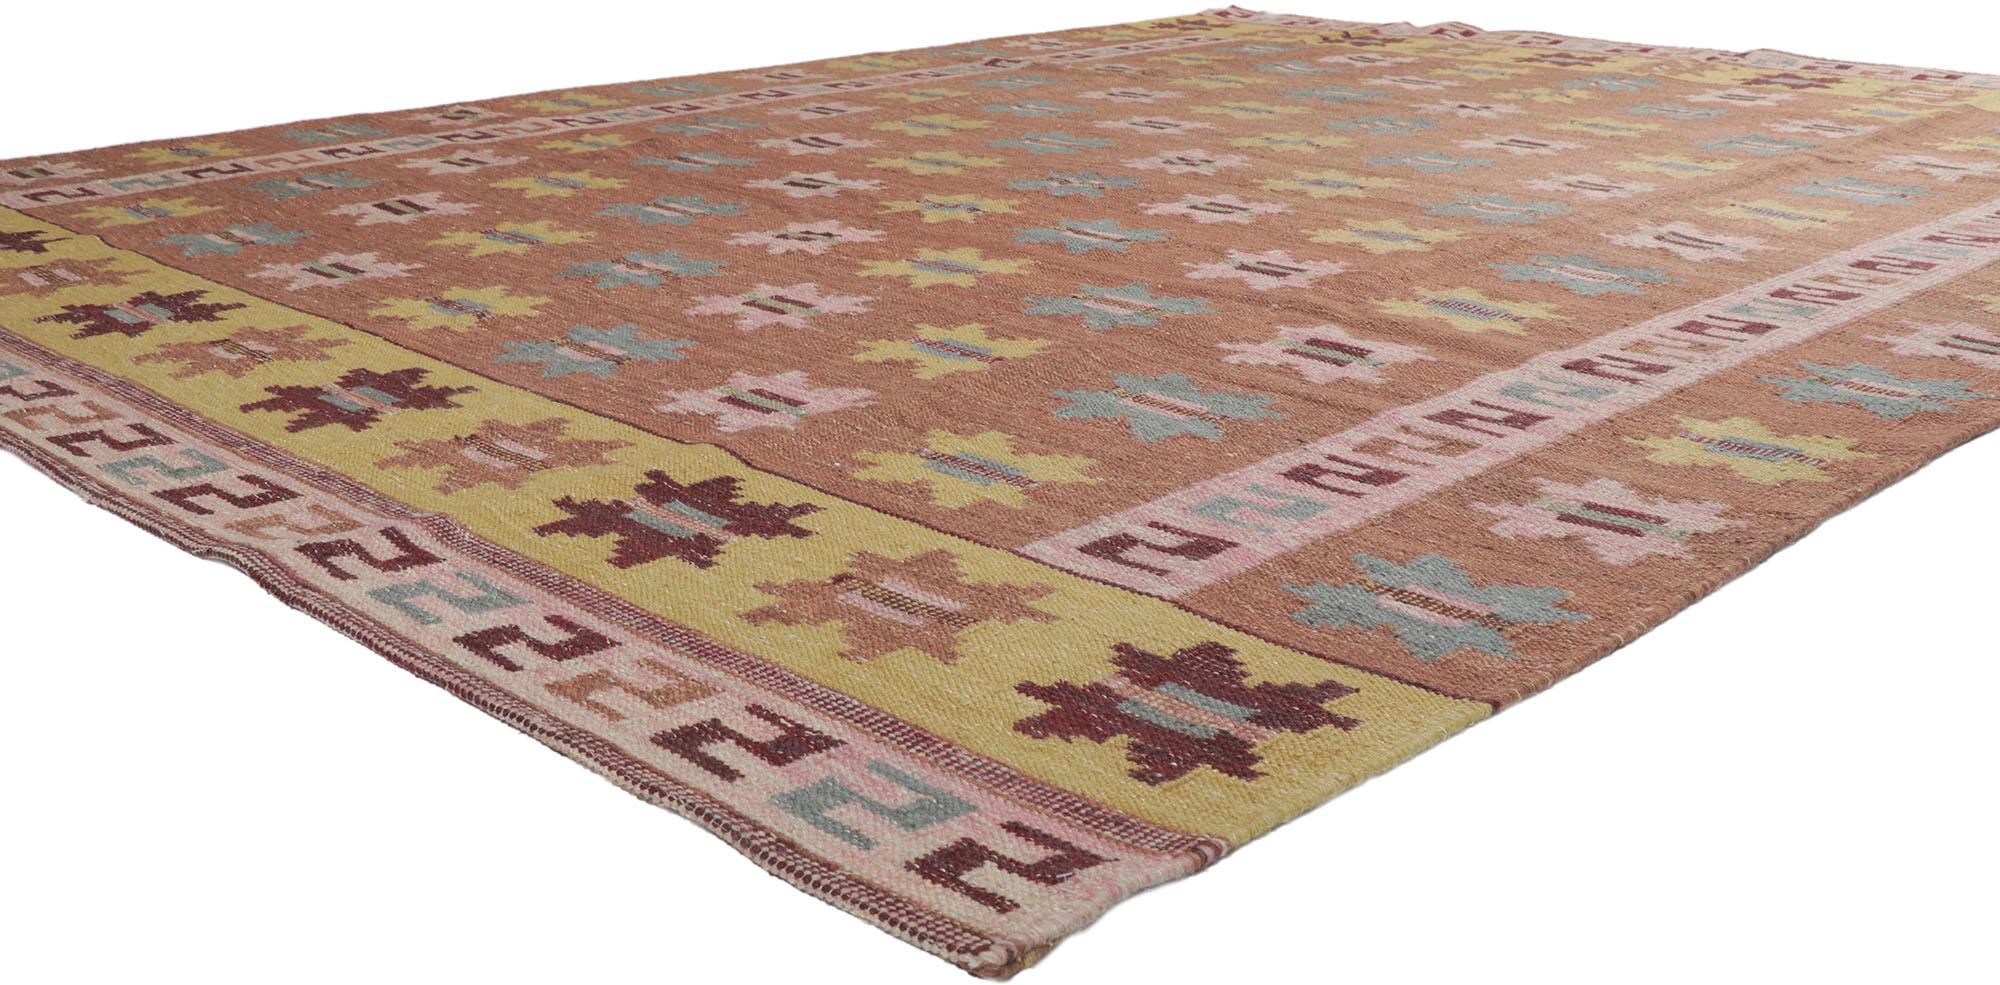 30681 New Swedish inspired Kilim rug inspired by Marta Maas-Fjetterstrom 10'00 x 12'11. With its simplicity, geometric design and soft colors, this hand-woven wool Swedish inspired Kilim rug is a vision of woven beauty. The abrashed rust colored